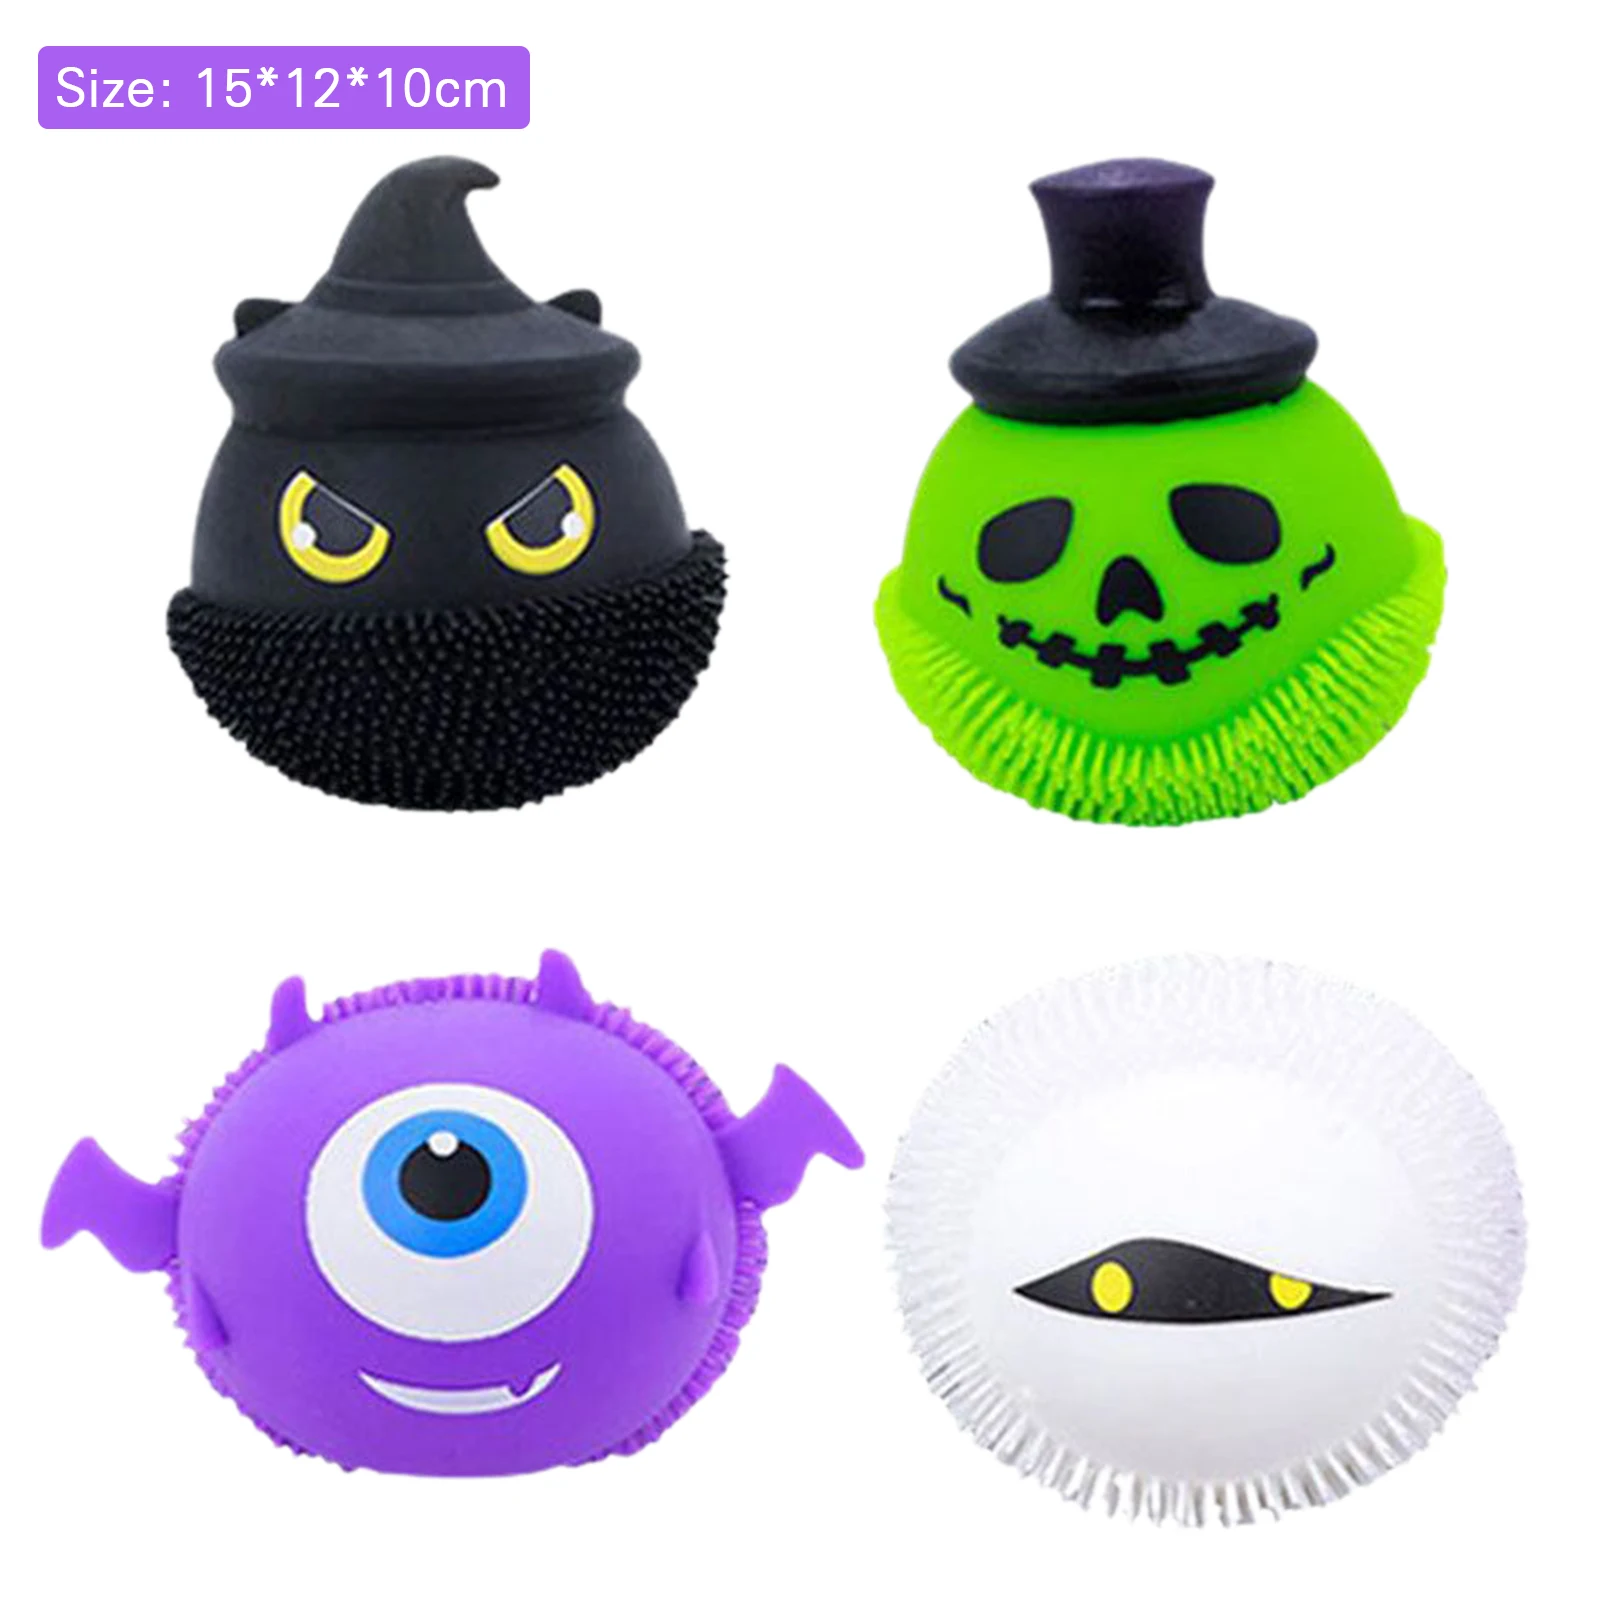 

Glowing Halloween Little Devil Squeeze Toy Creative Soft TPR Ball Decompression Fidget Sensory Ball Novelty Toys Great Gift AN88